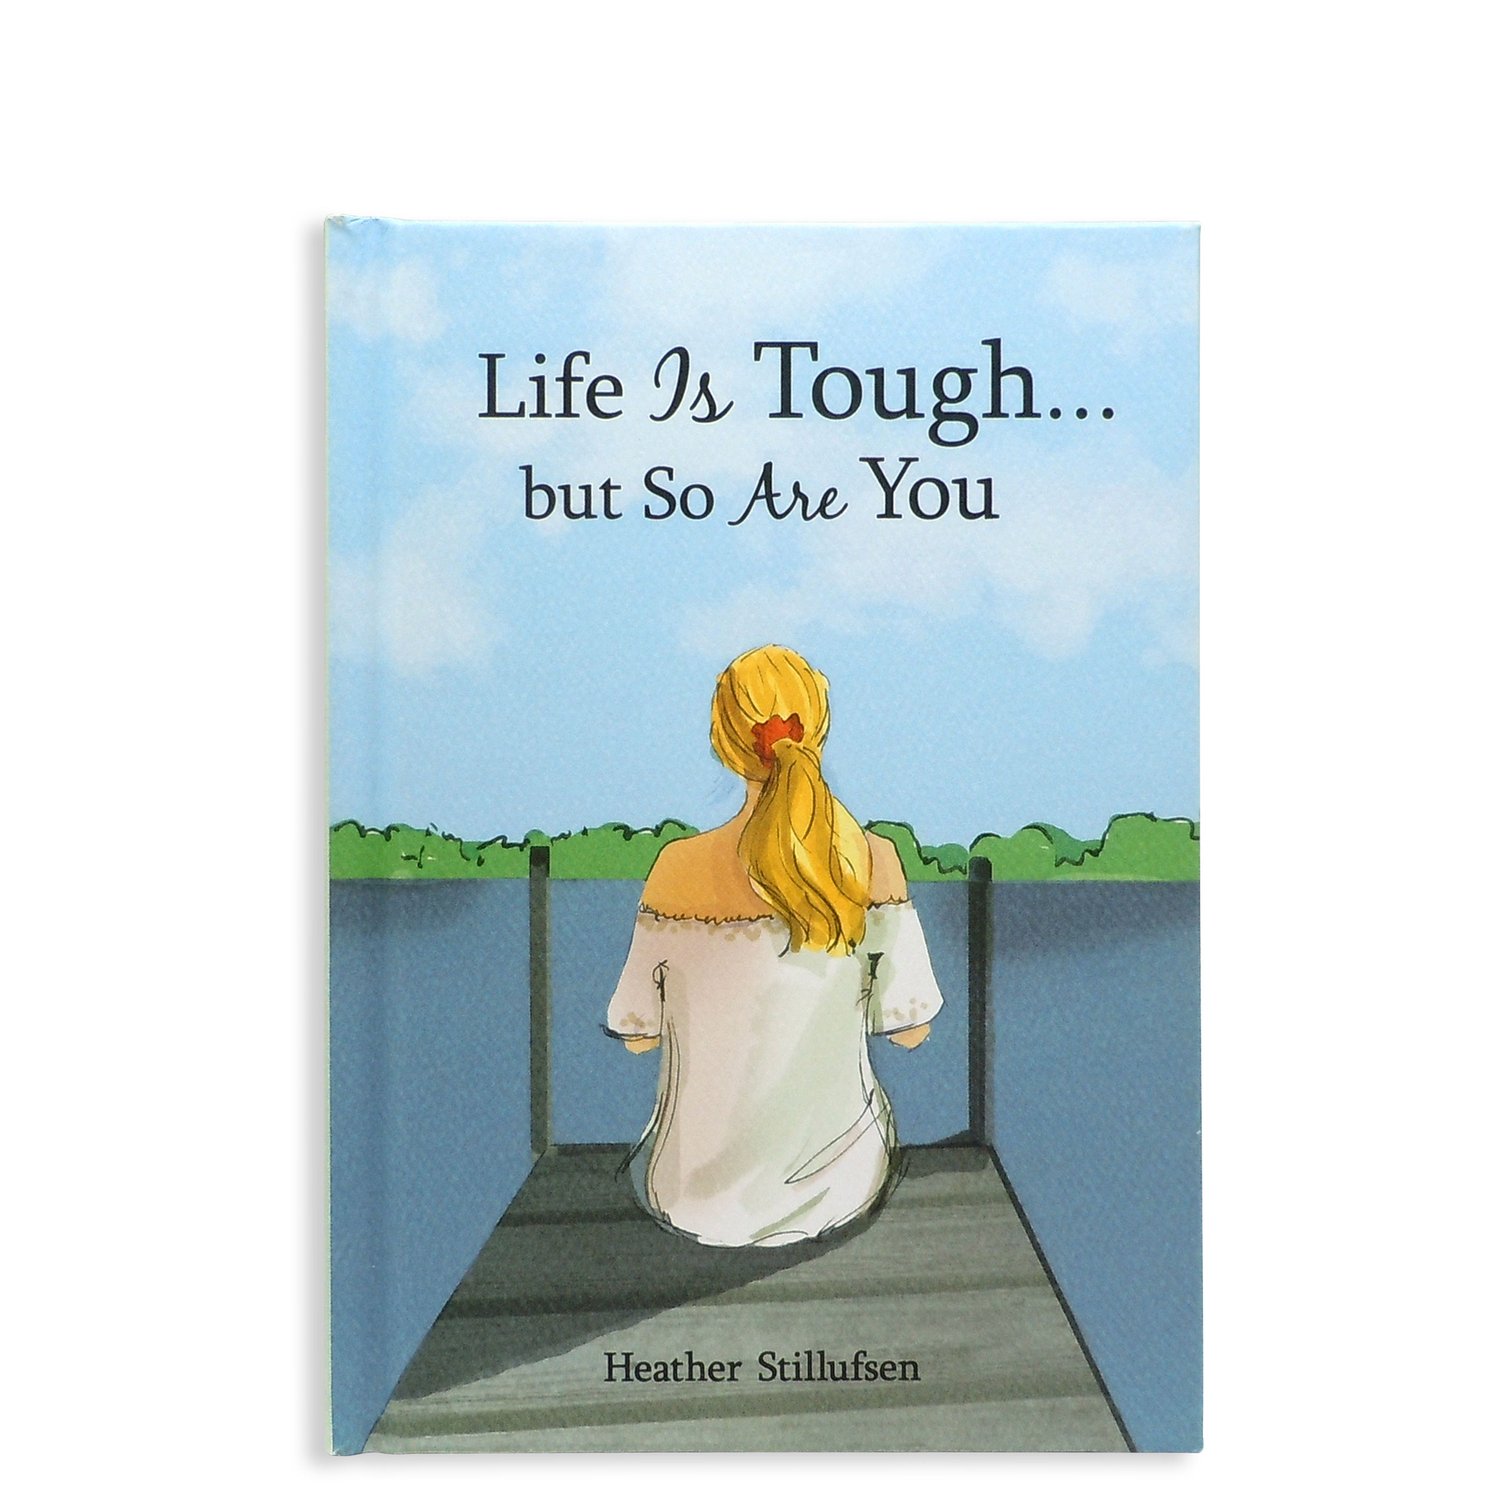 Life Is Tough... but So Are You by Heather Stillufsen